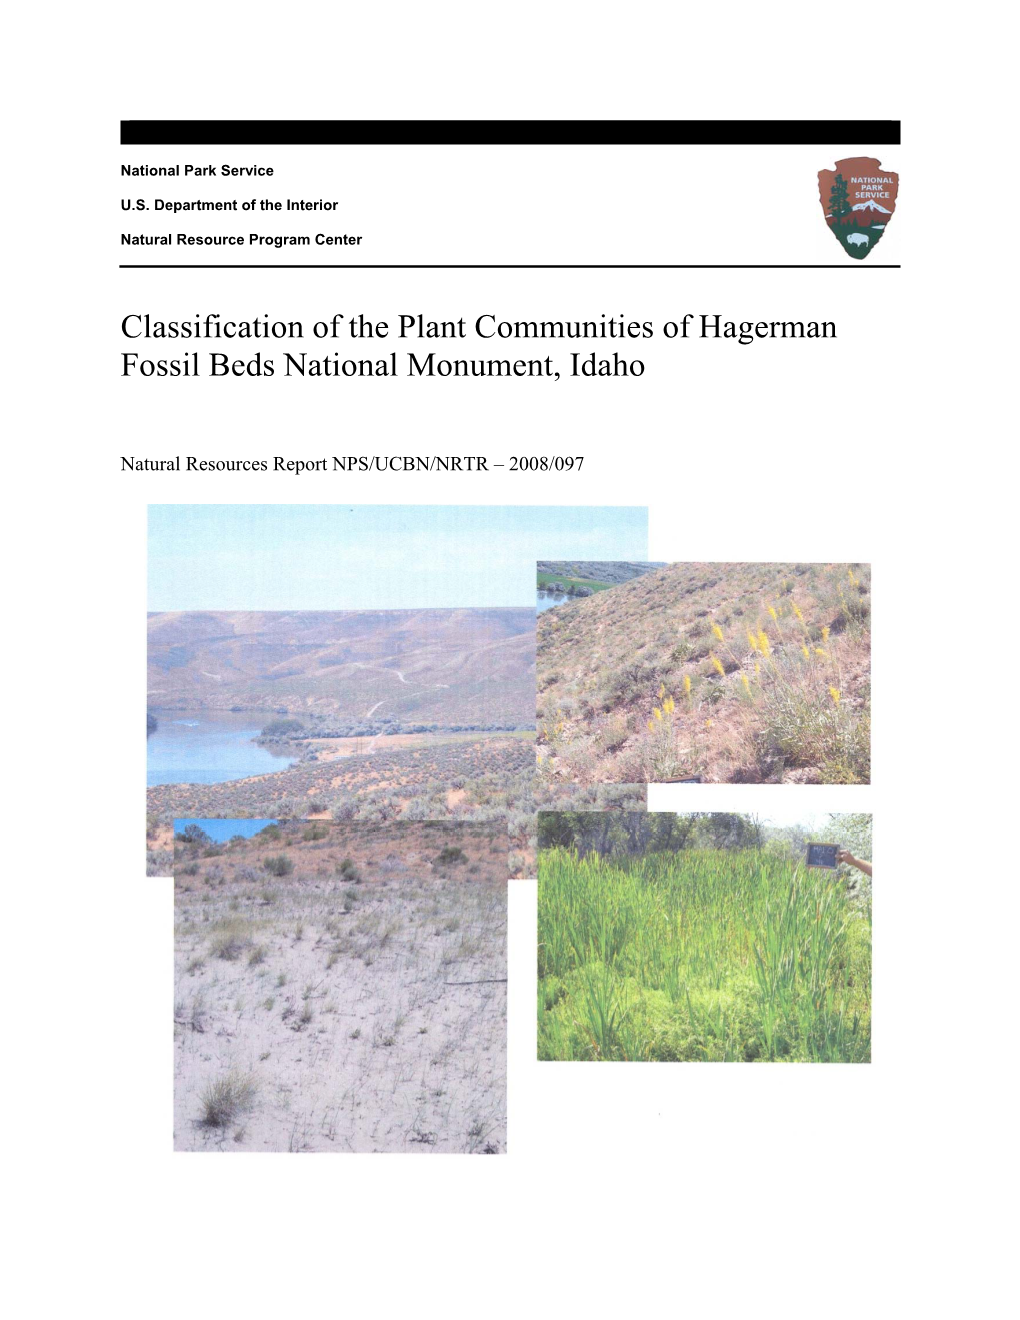 Classification of the Plant Communities of Hagerman Fossil Beds National Monument, Idaho